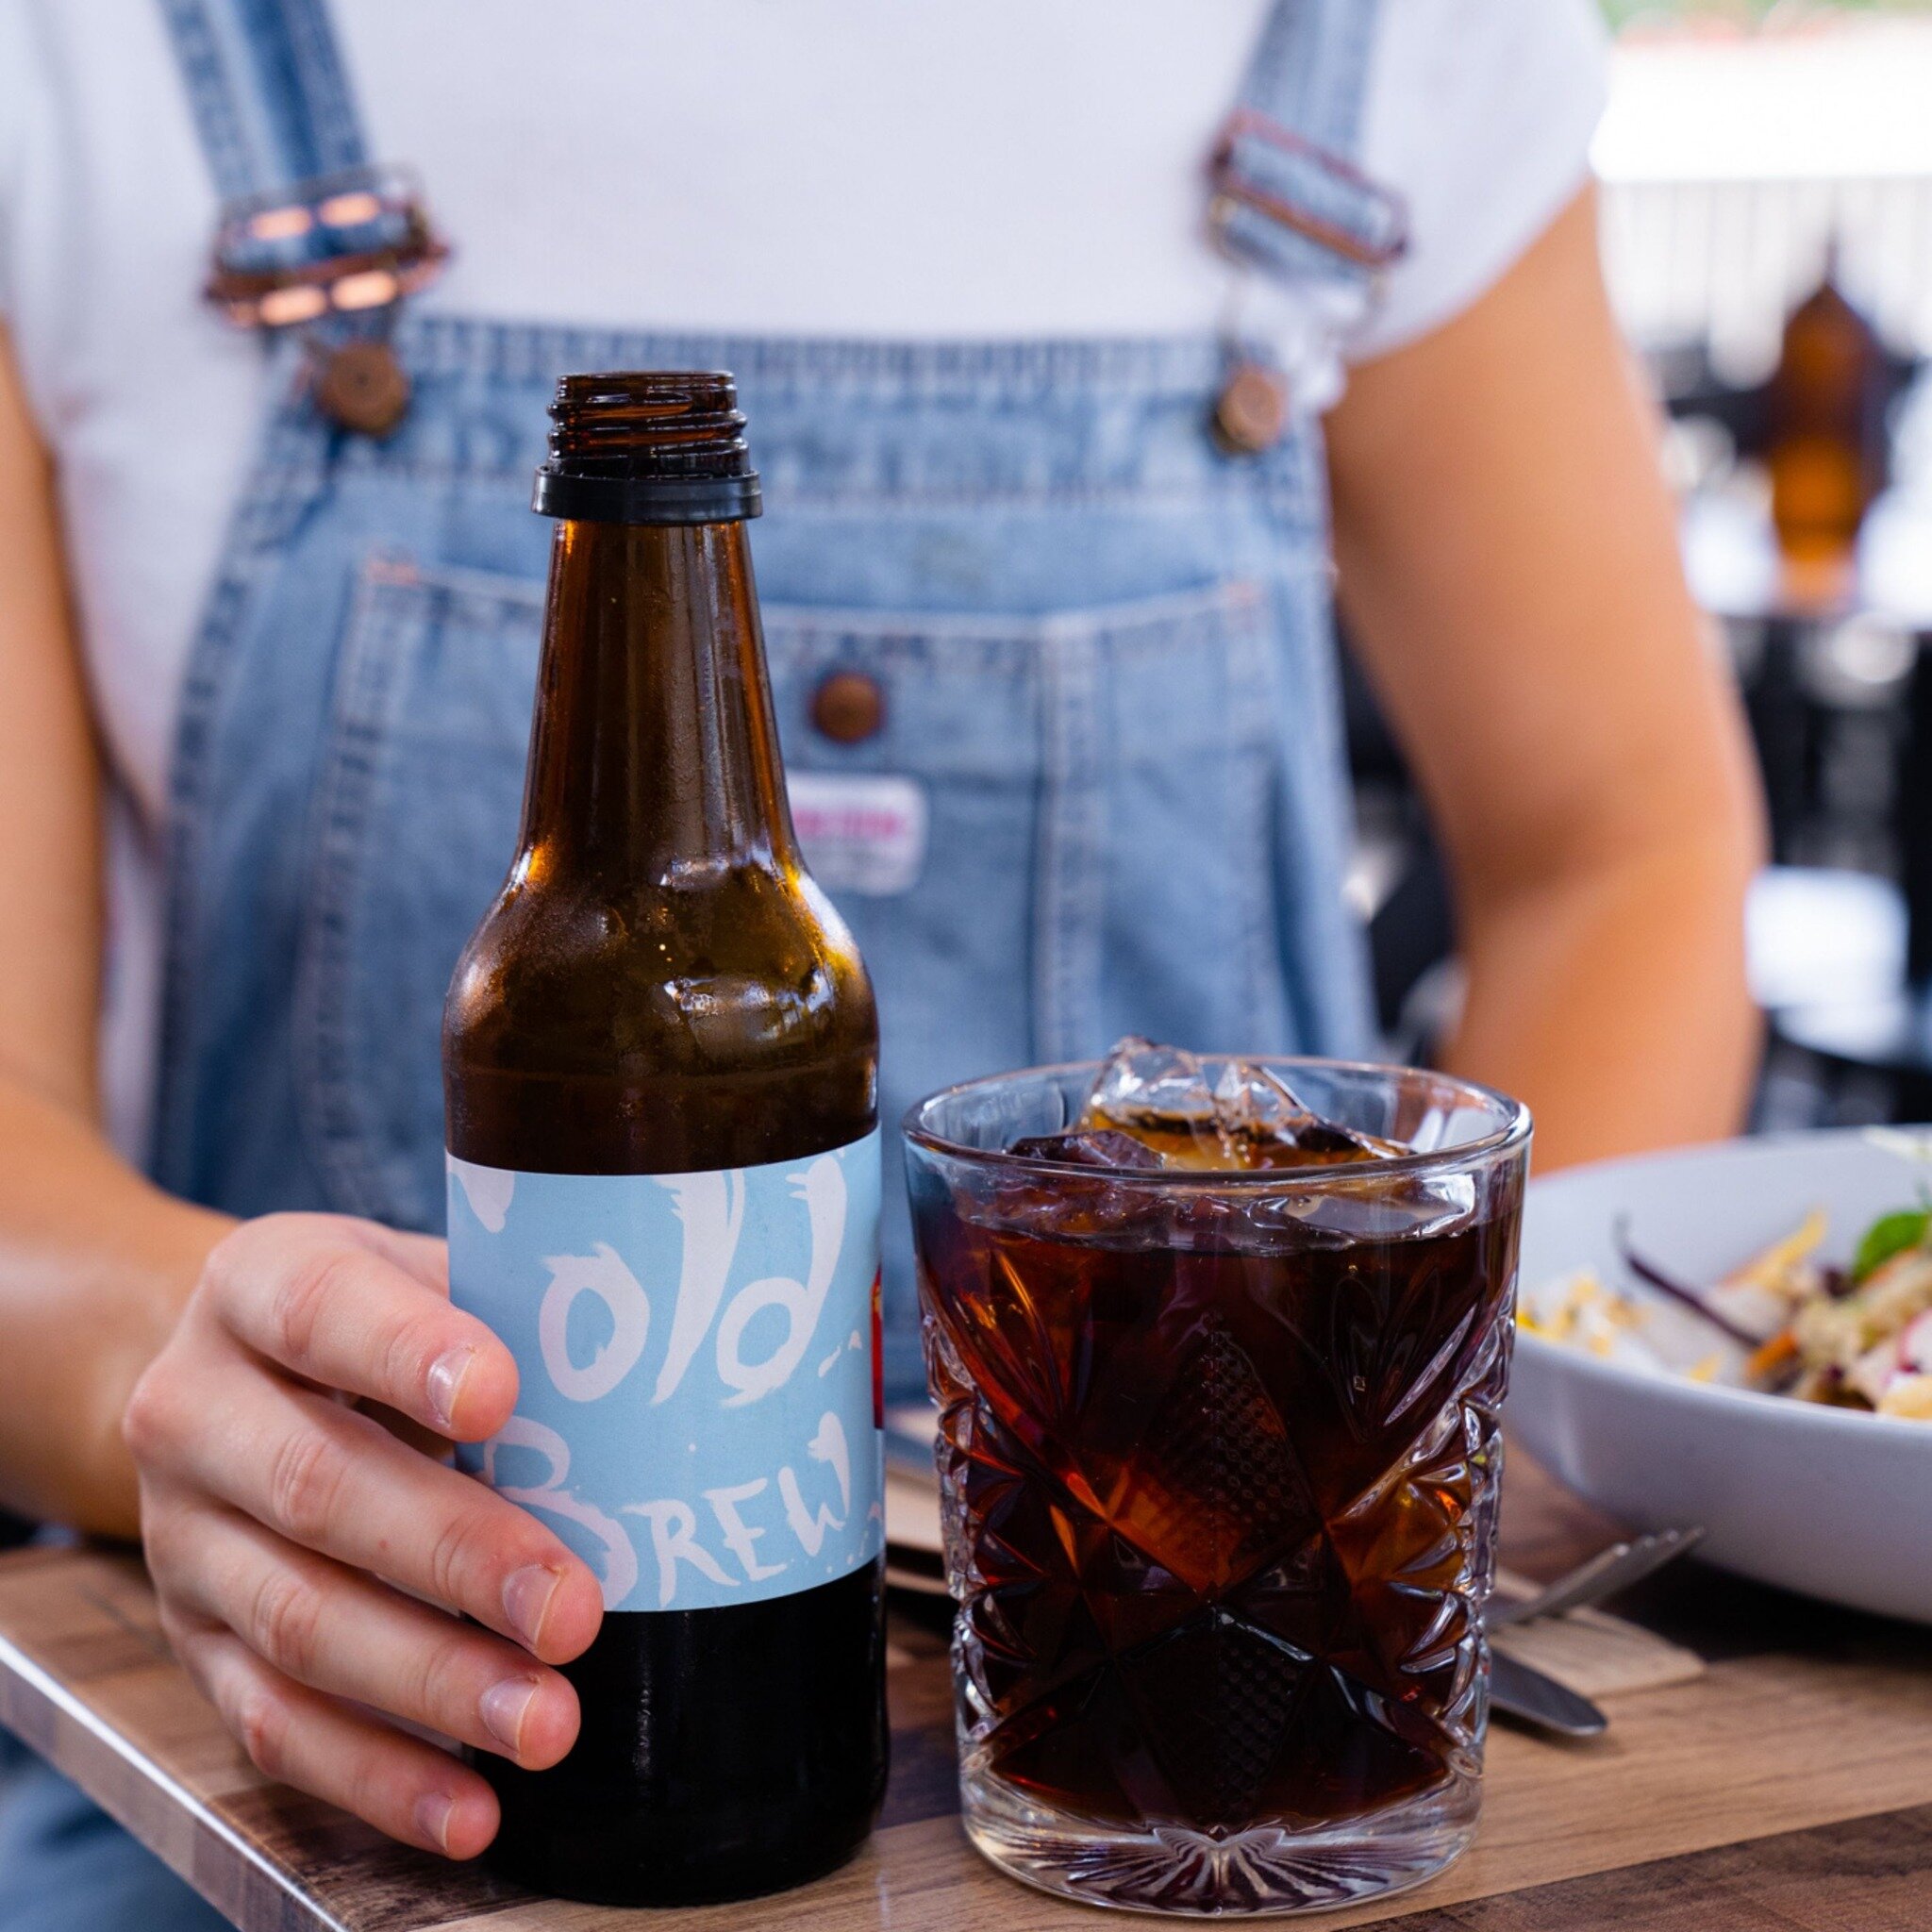 Need a quick grab and go option? Our cold brew never fails!

#deedot #bottomlessbrunchbrisbane #deedotcoffeehouse #hollandparkwest #brisbaneanyday #brisbanefoodie #brissy #brisbanecafe #brisbaneeats #brisbanecoffee #brisbanebrews